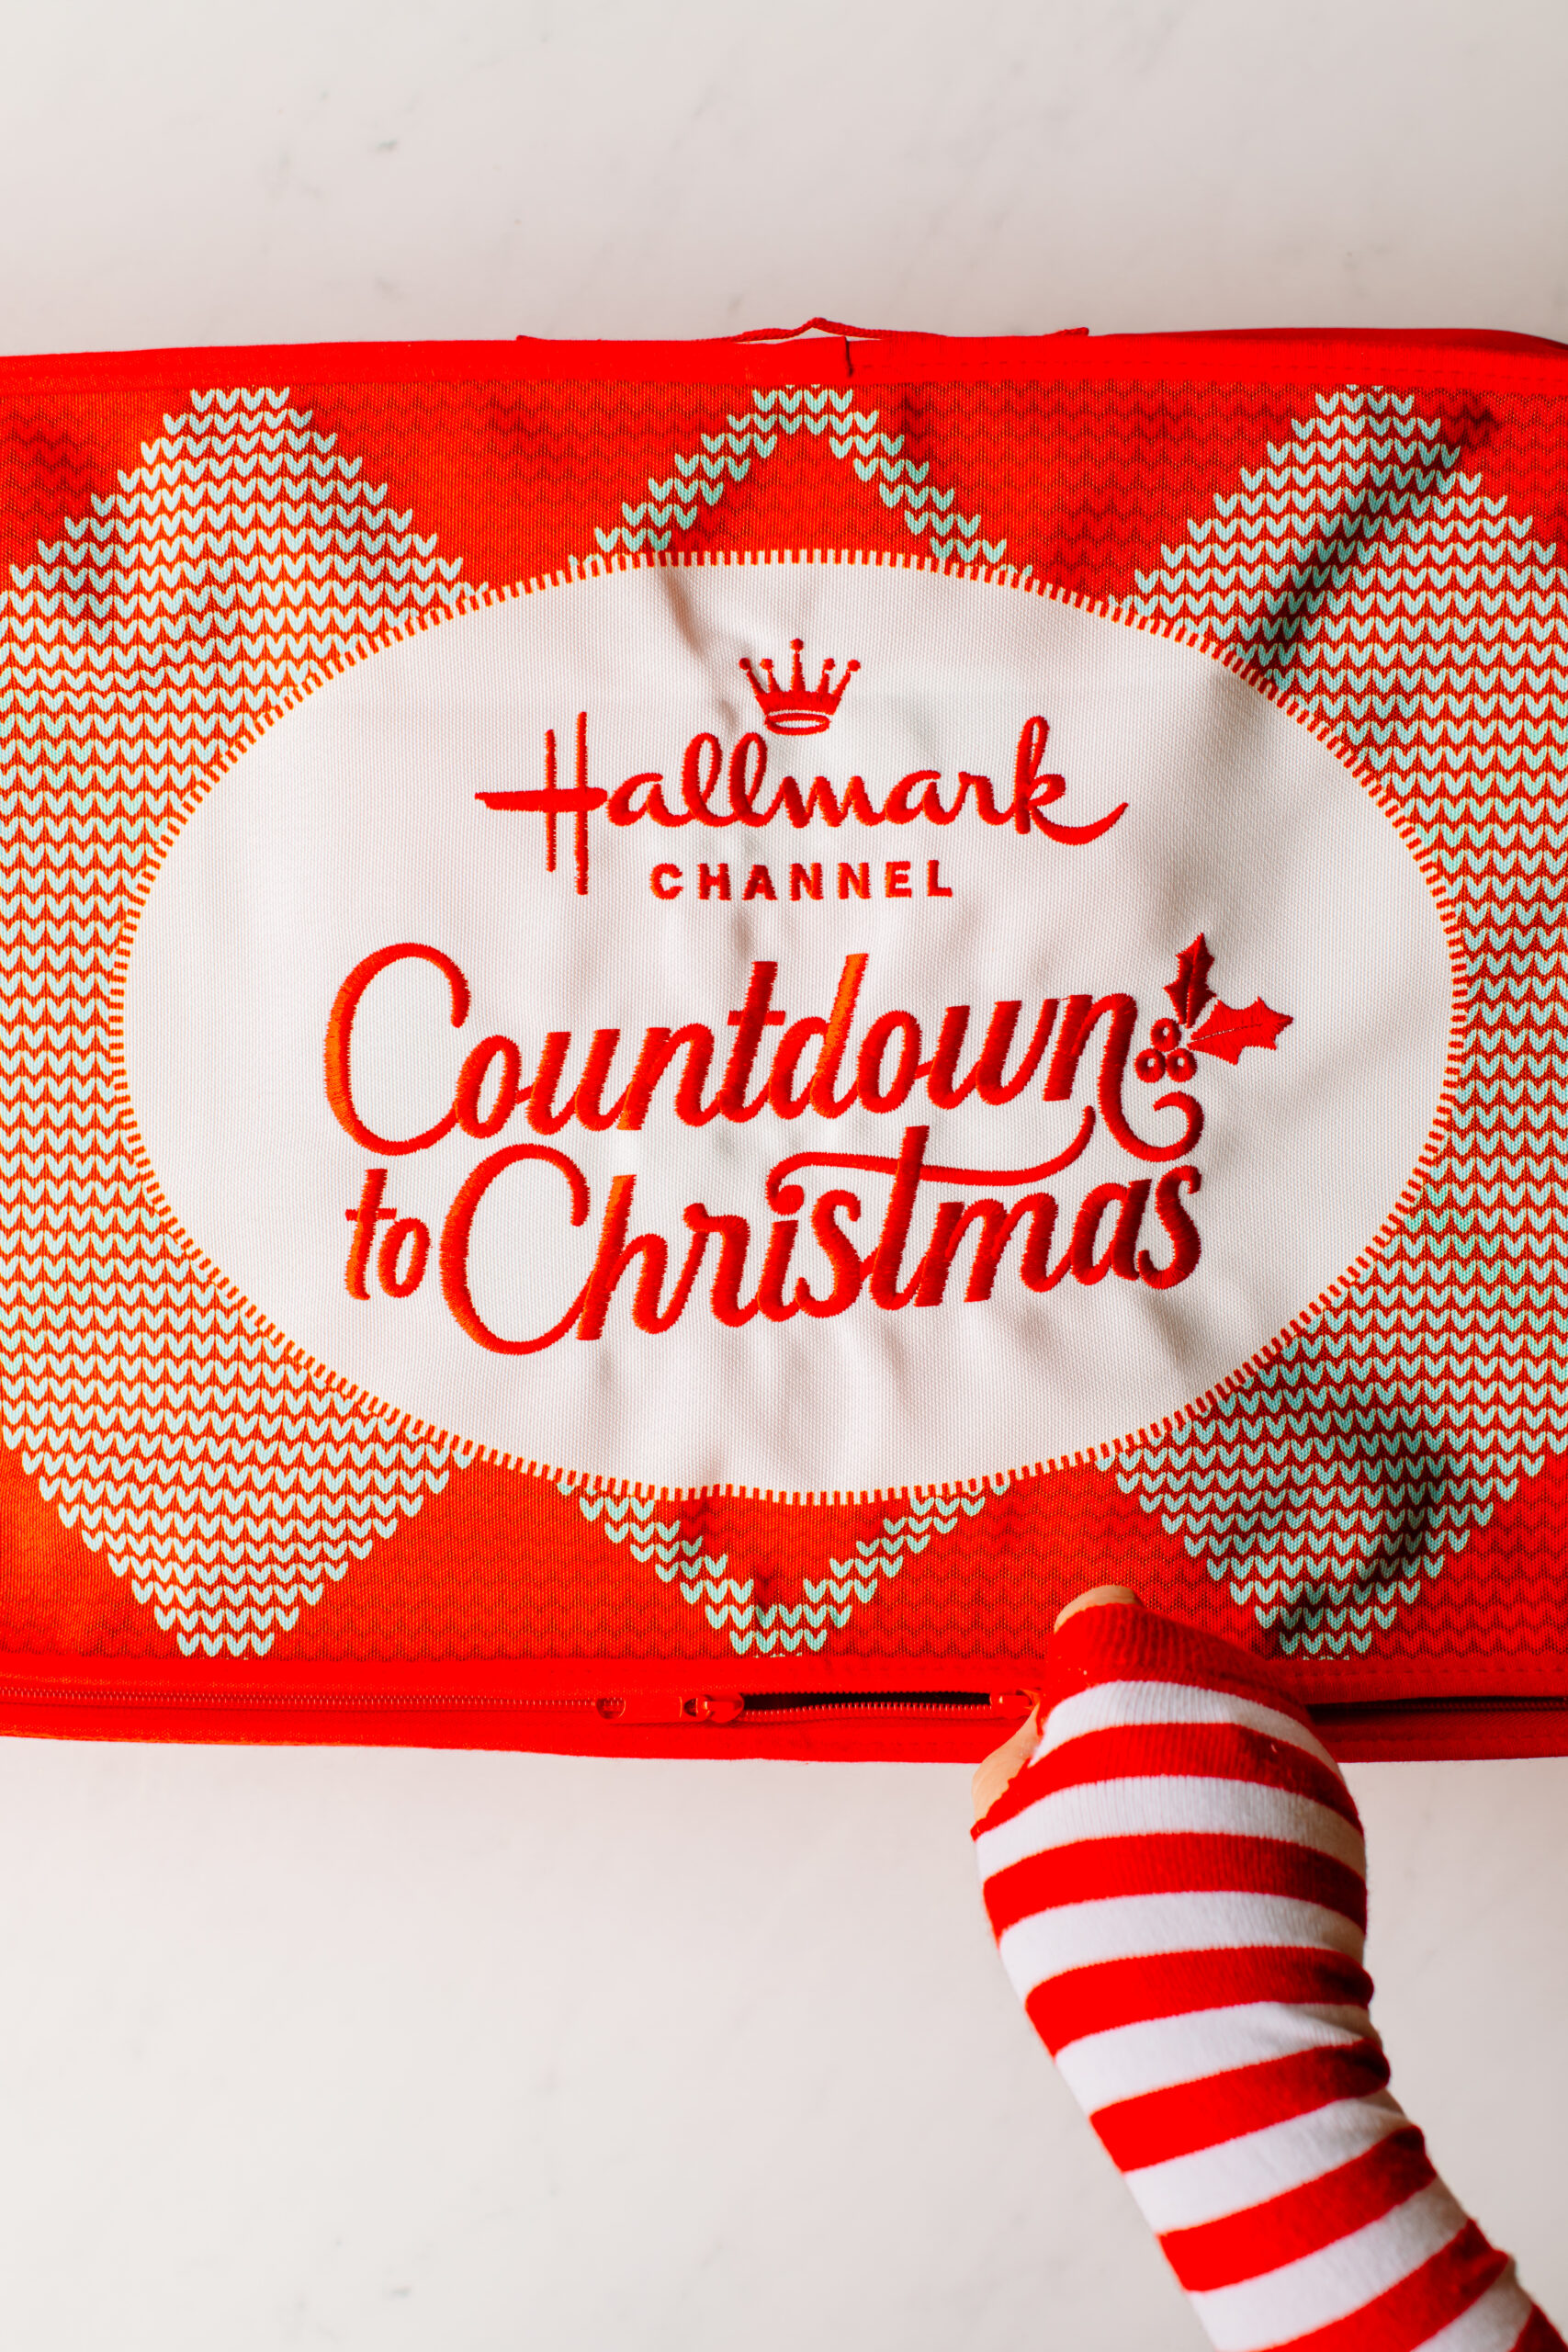 hallmark countdown to christmas gift wrapping kit package